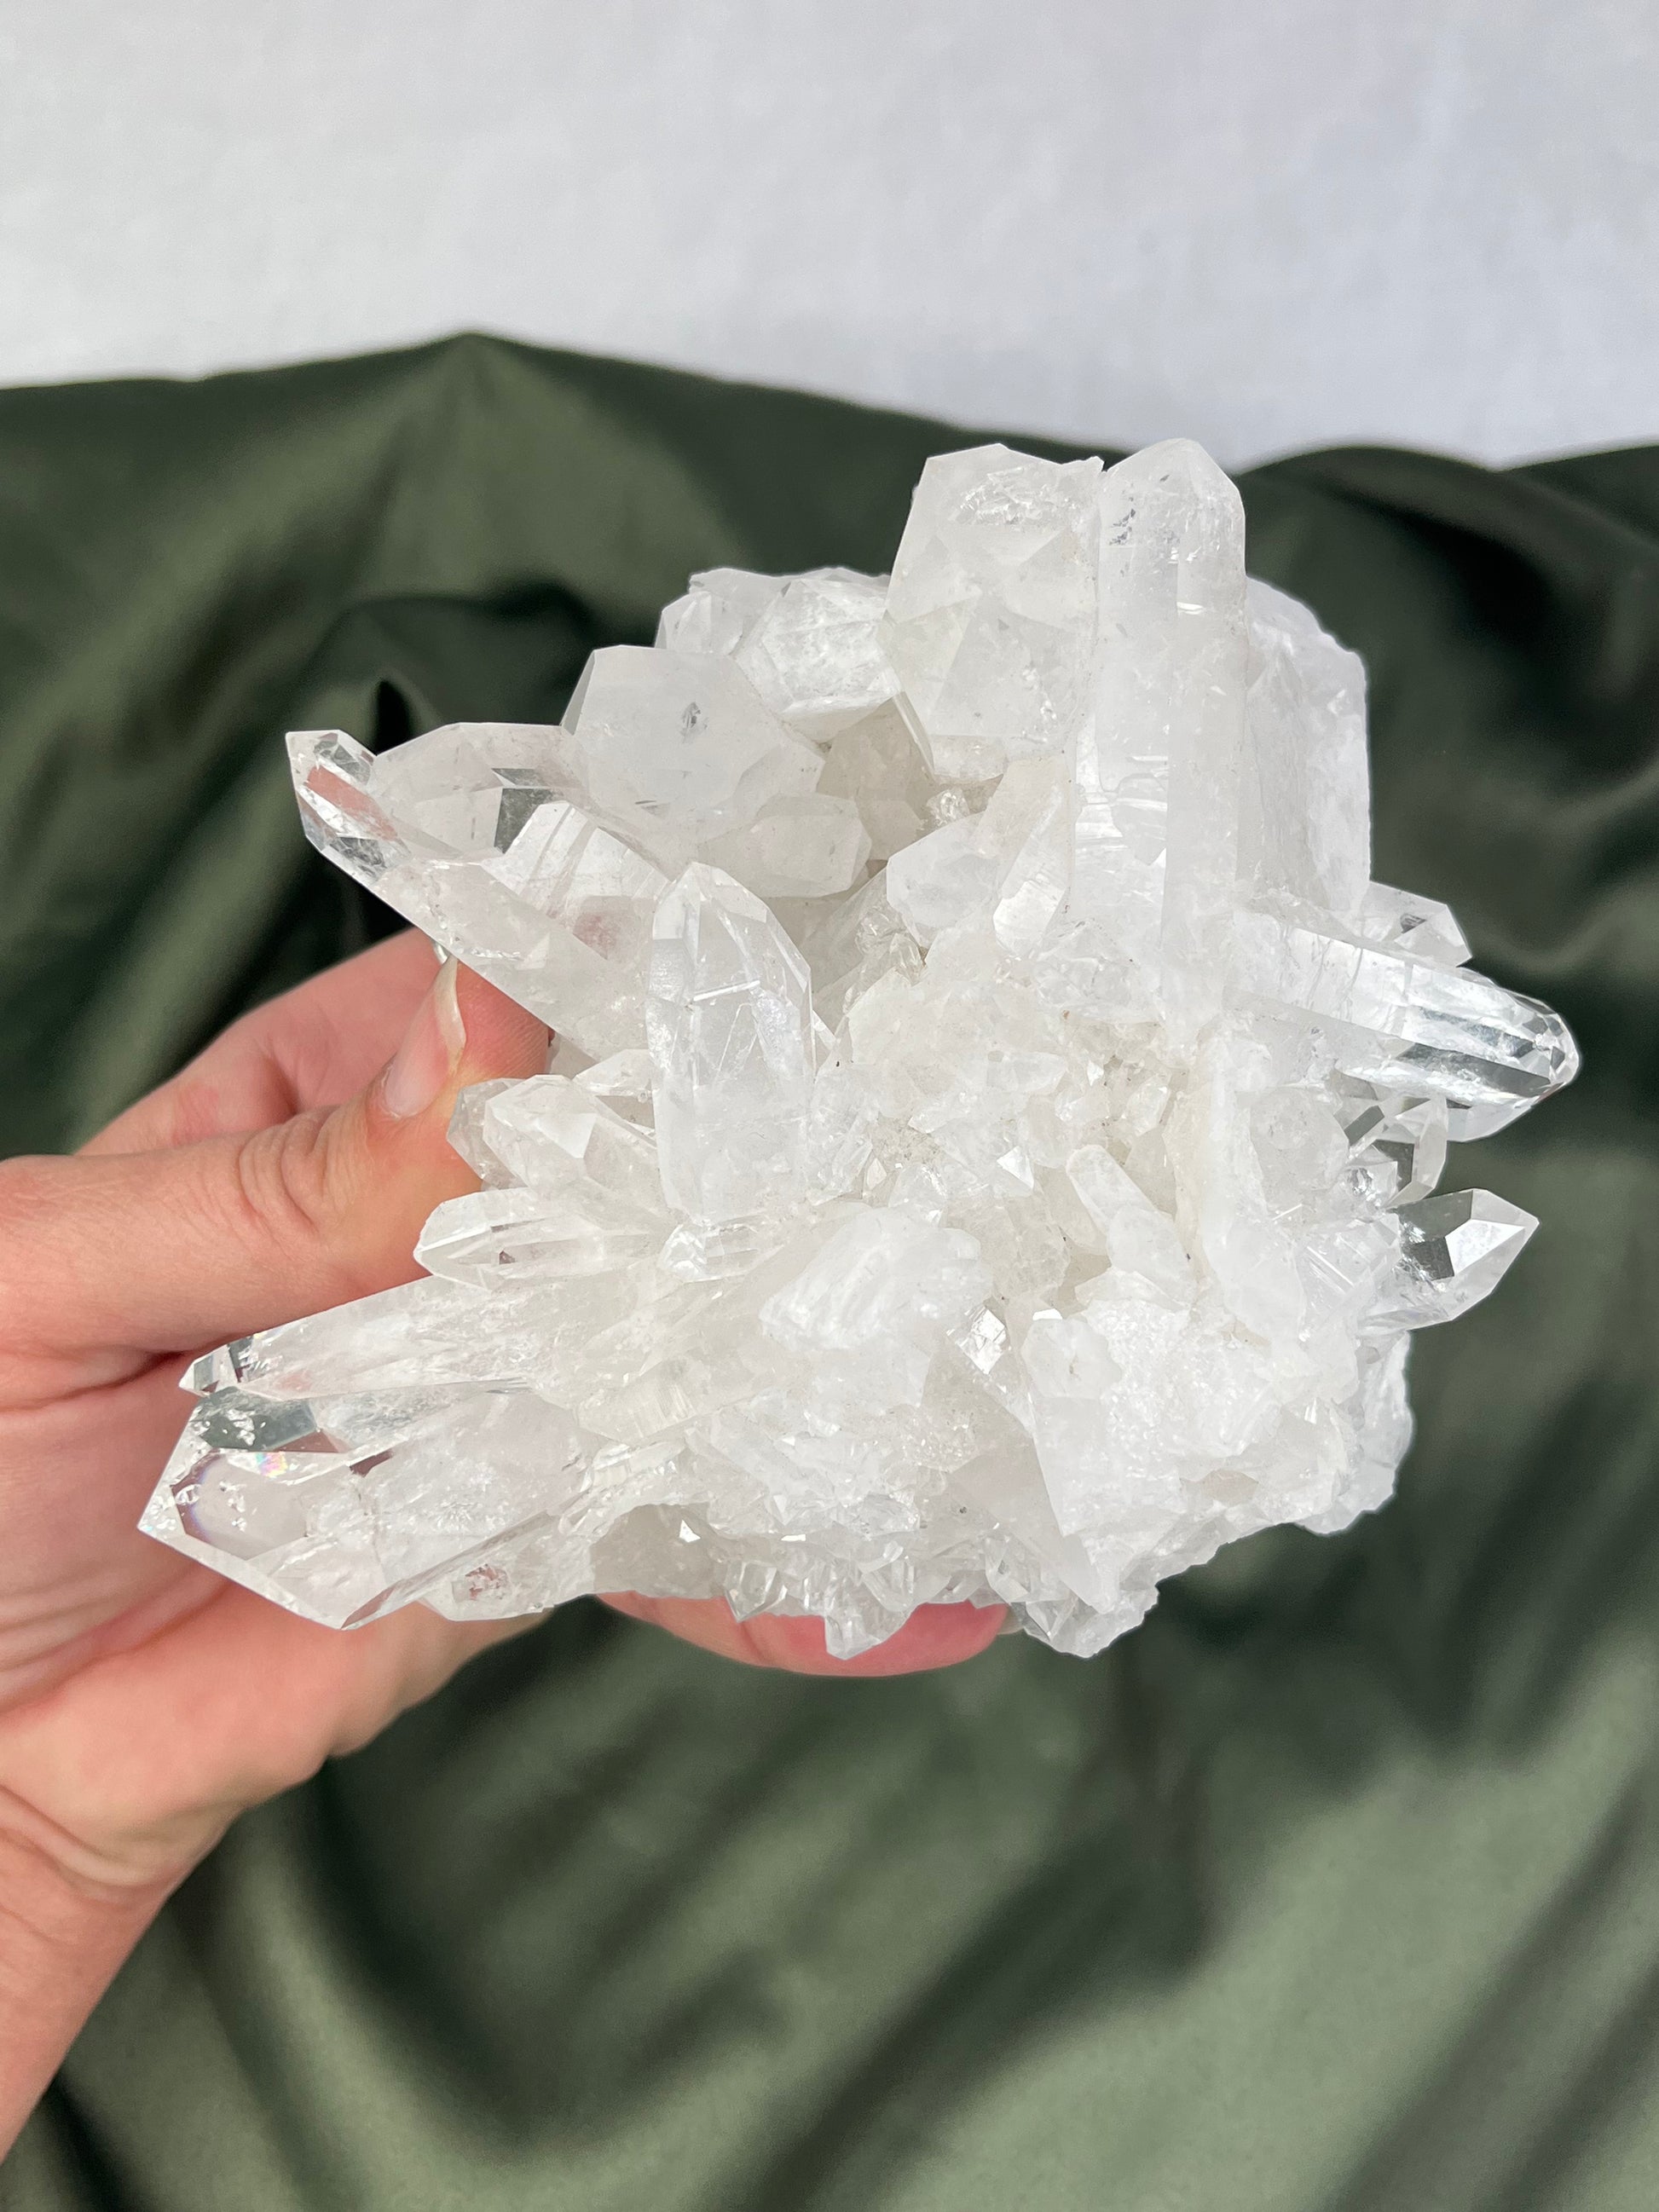 CLEAR QUARTZ CLUSTER, STONED AND SAGED AUSTRALIA